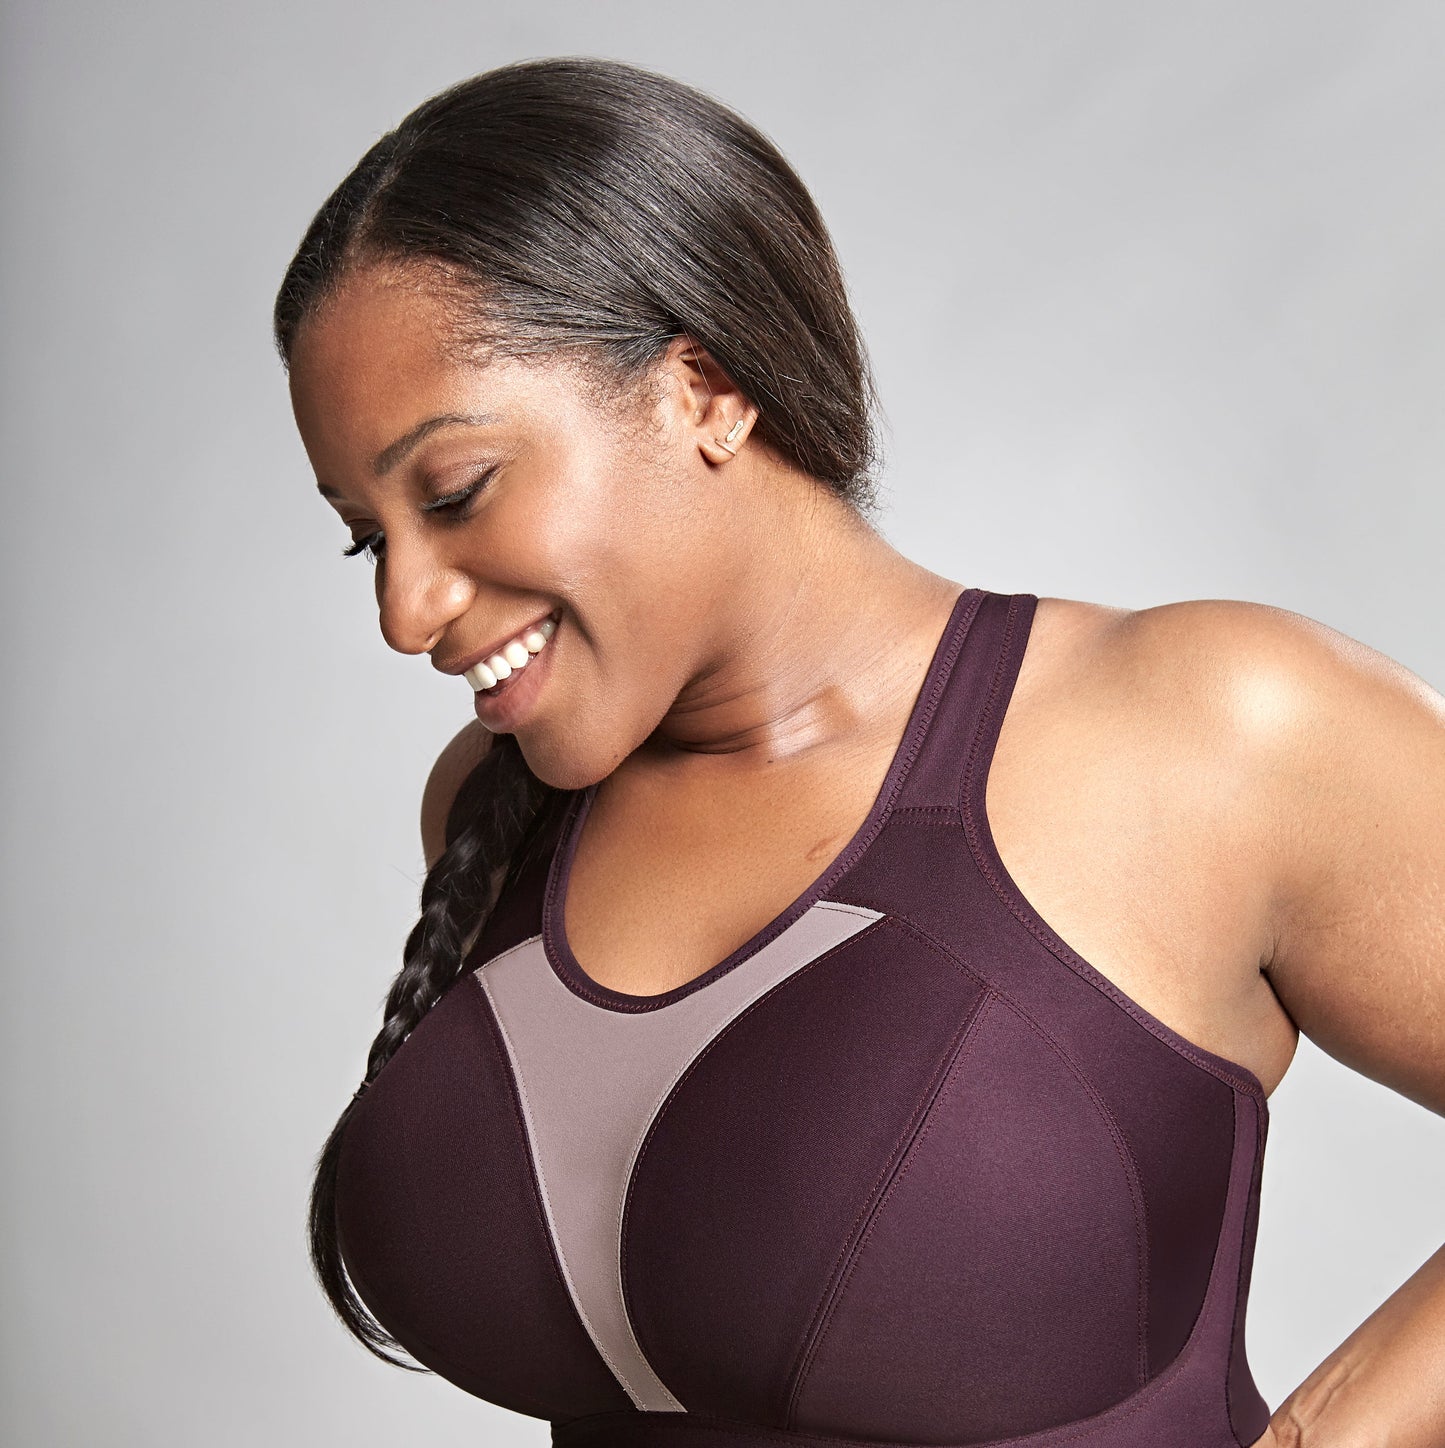 SportsBra Ltd - Good news for ladies with big boobs! Royce Aerocool  combines excellent support for fuller cups and has a moisture-wicking  fabric to draw sweat away from the skin. Aerocool is